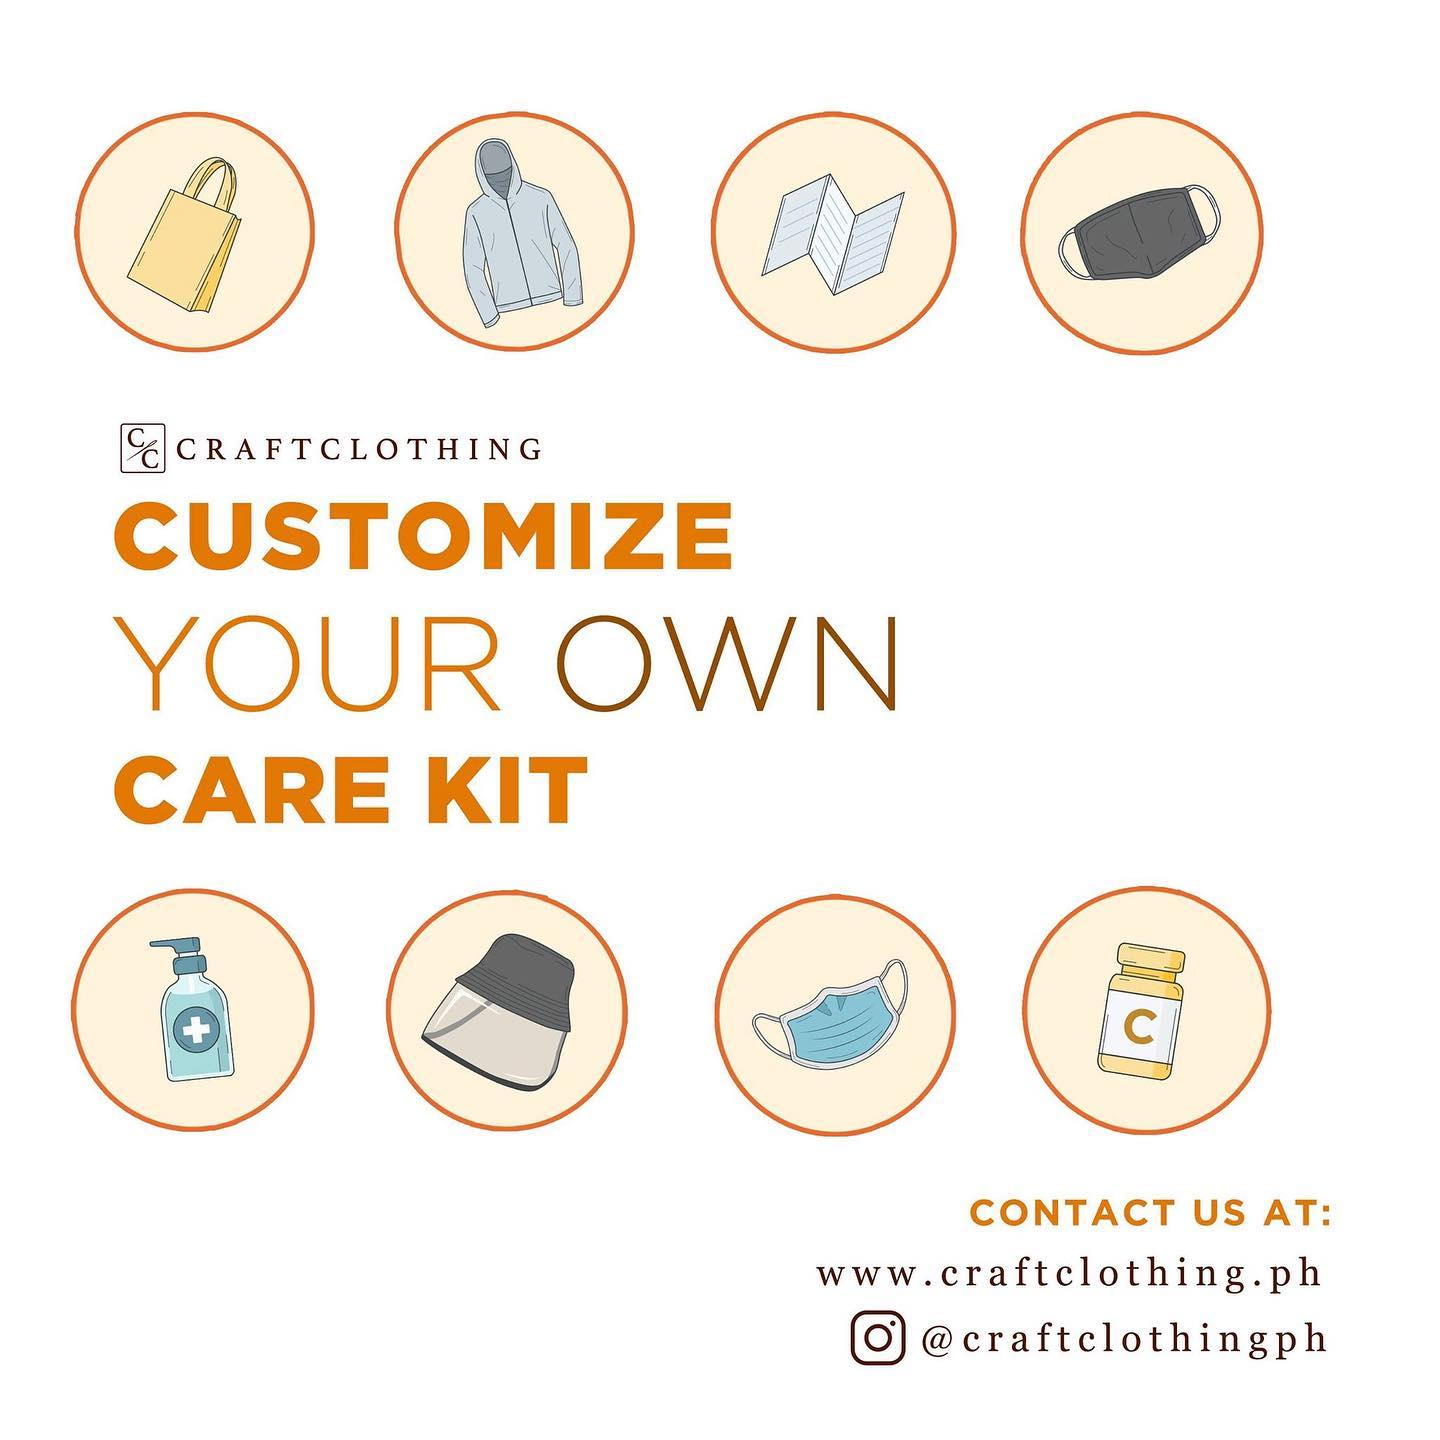 CUSTOMIZE YOUR OWN CARE KIT